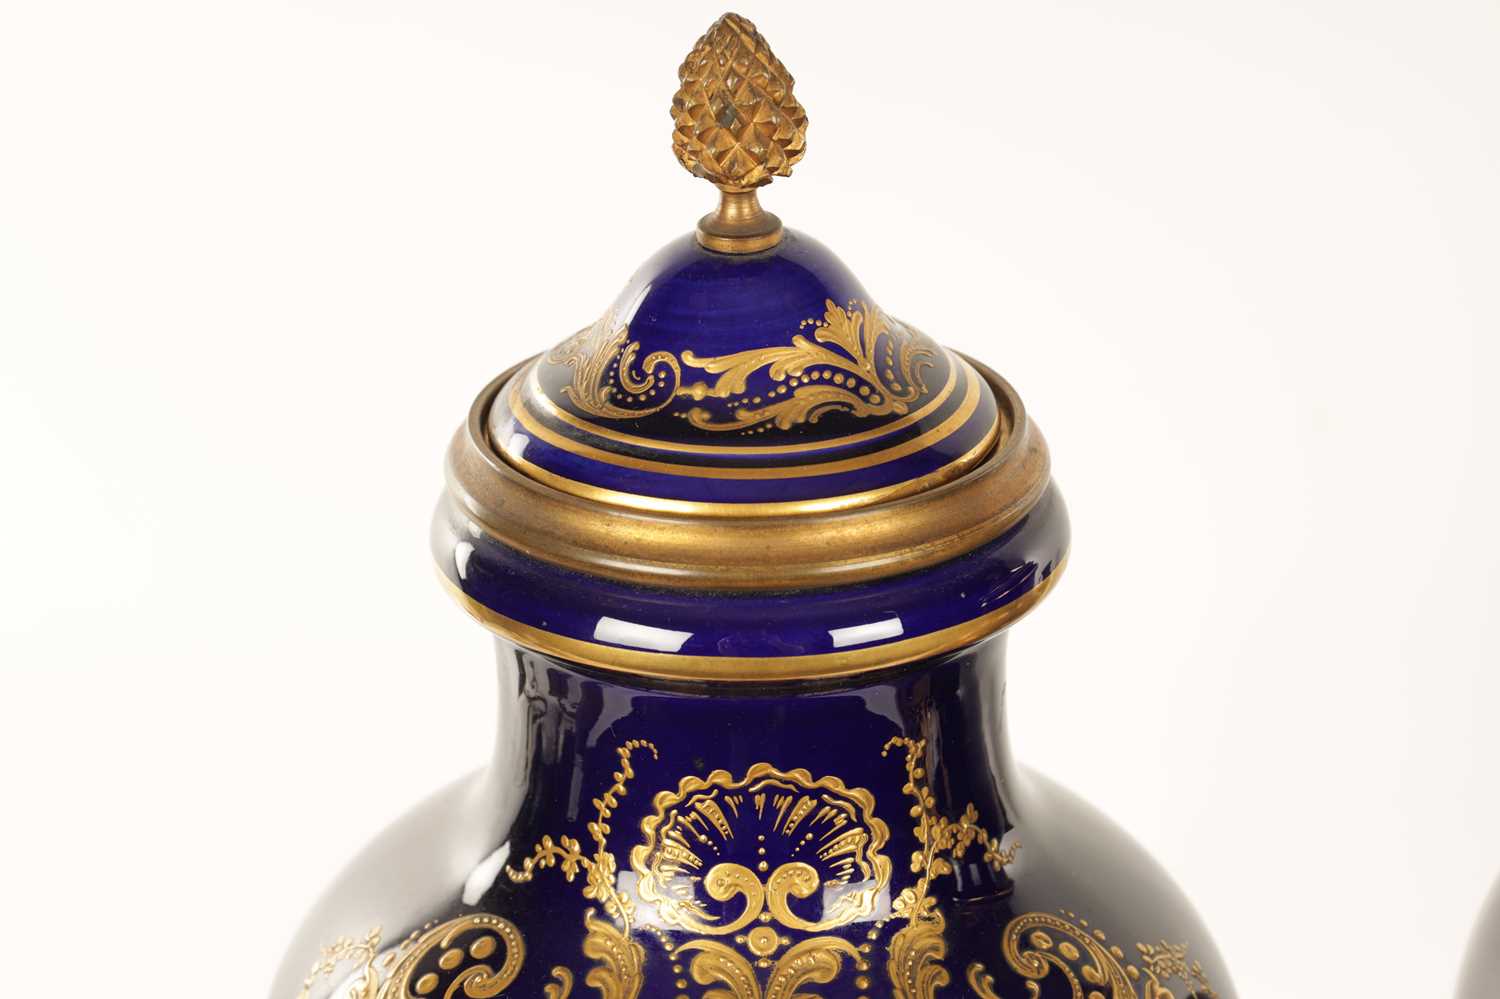 A PAIR OF LATE 19TH-CENTURY SERVES STYLE PORCELAIN LARGE CABINET VASES - Image 5 of 20